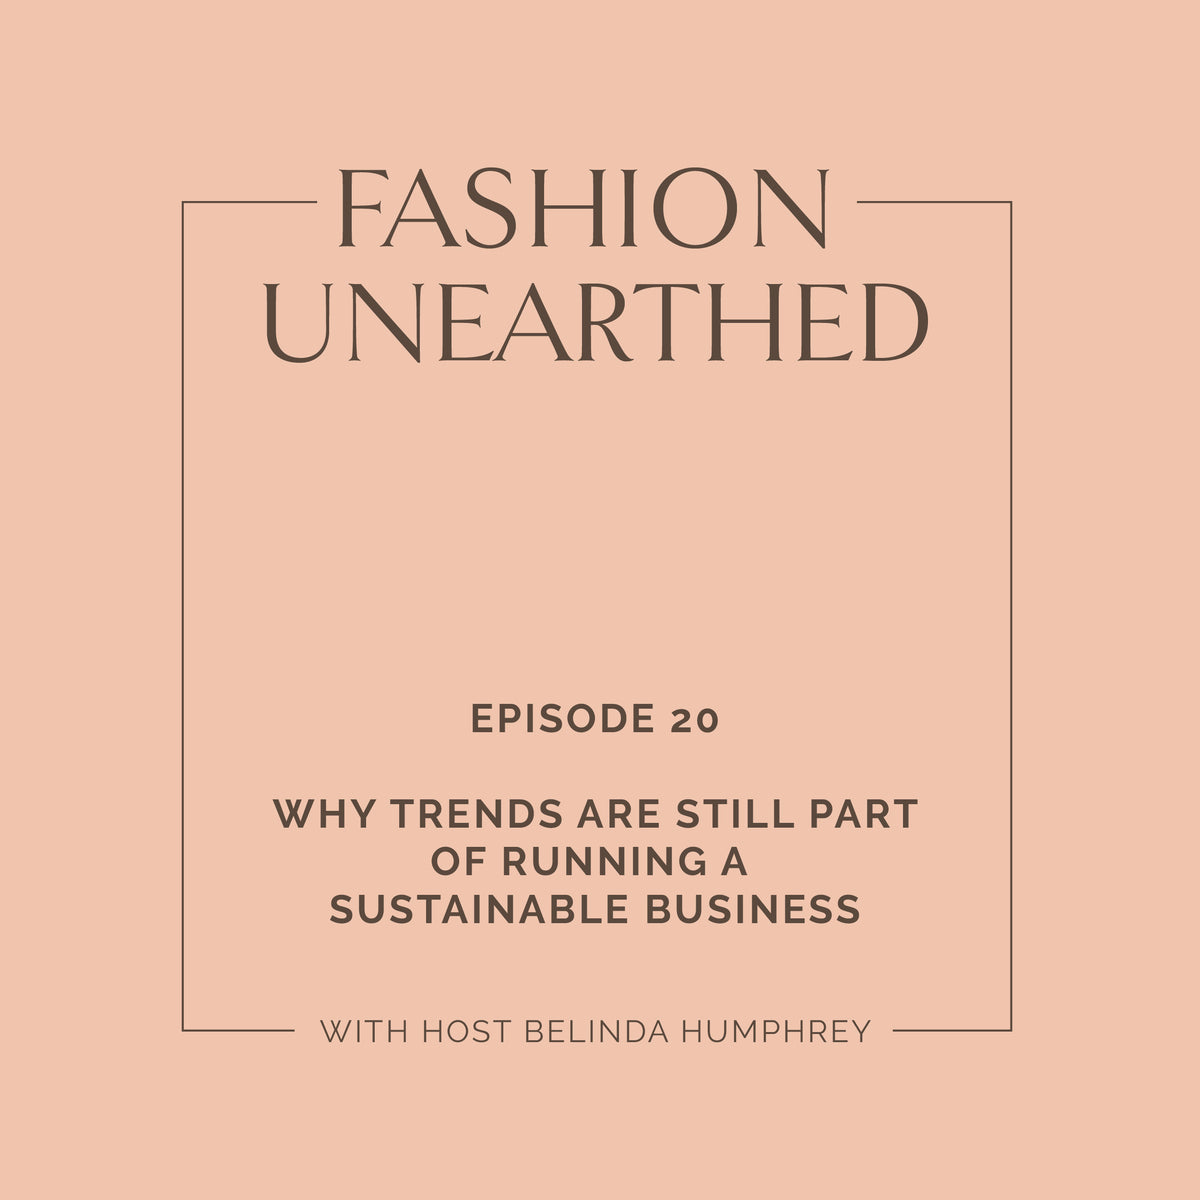 Episode 20: Why Trends are still part of running a sustainable business